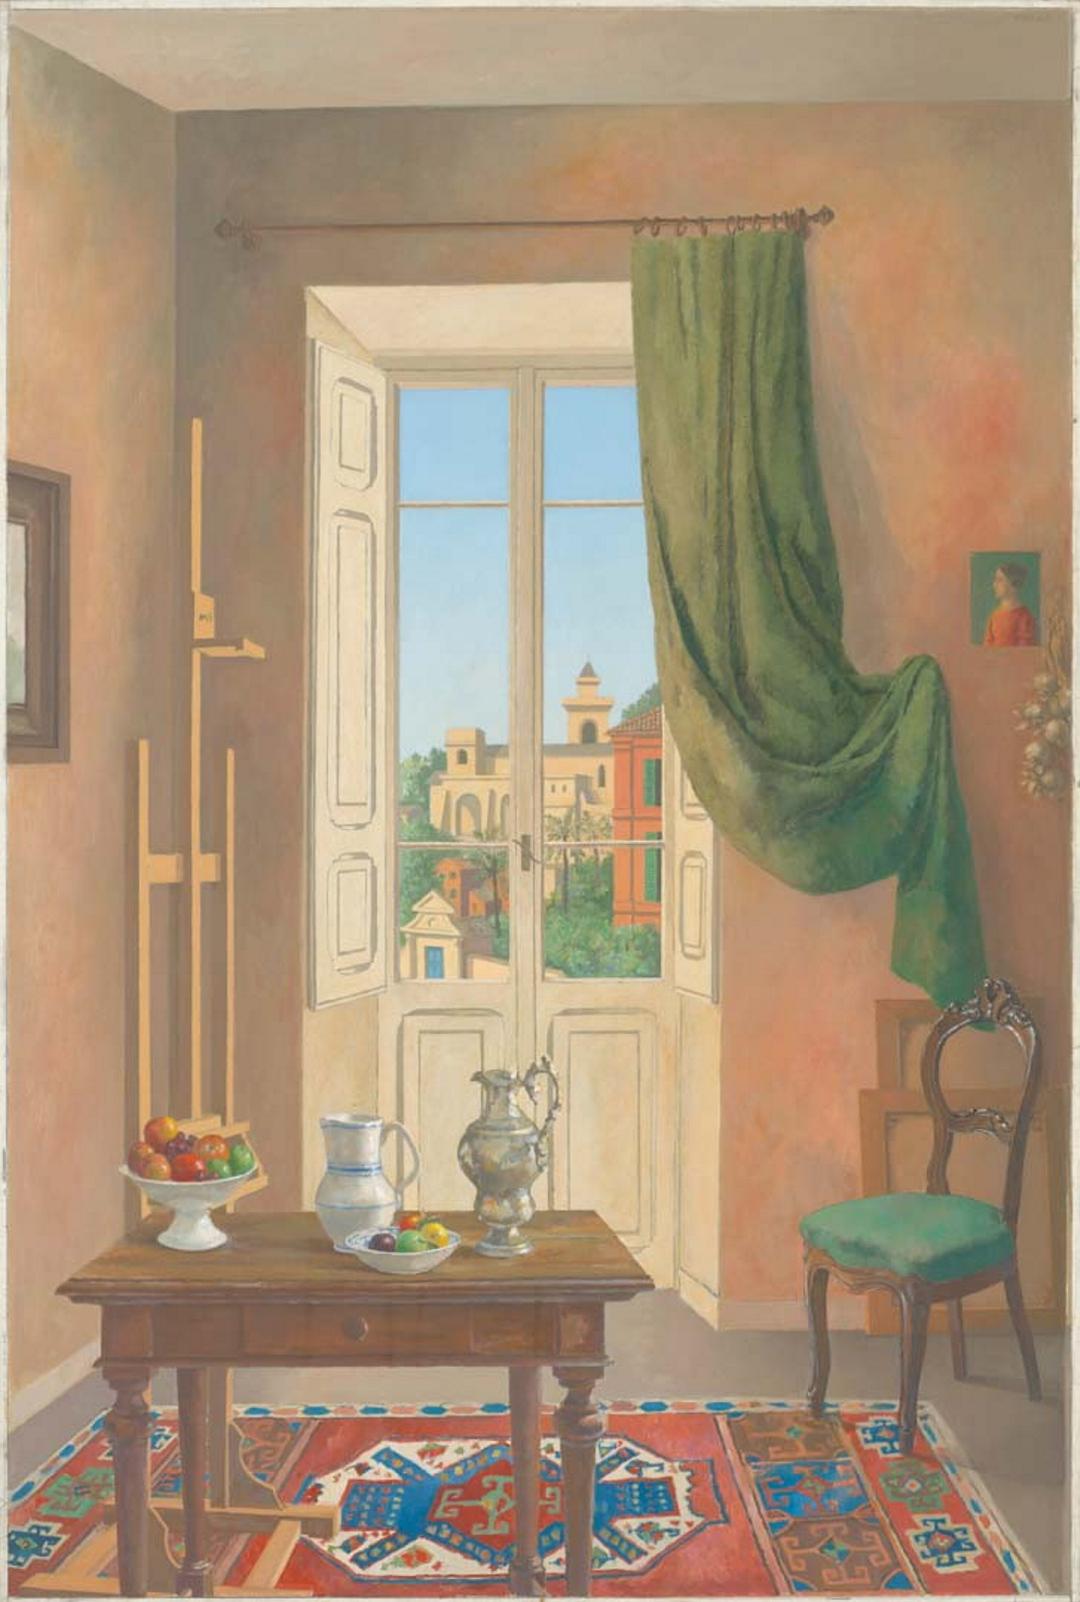 A painting of the artist's studio, with a window looking out to a bright clear day in Rome.